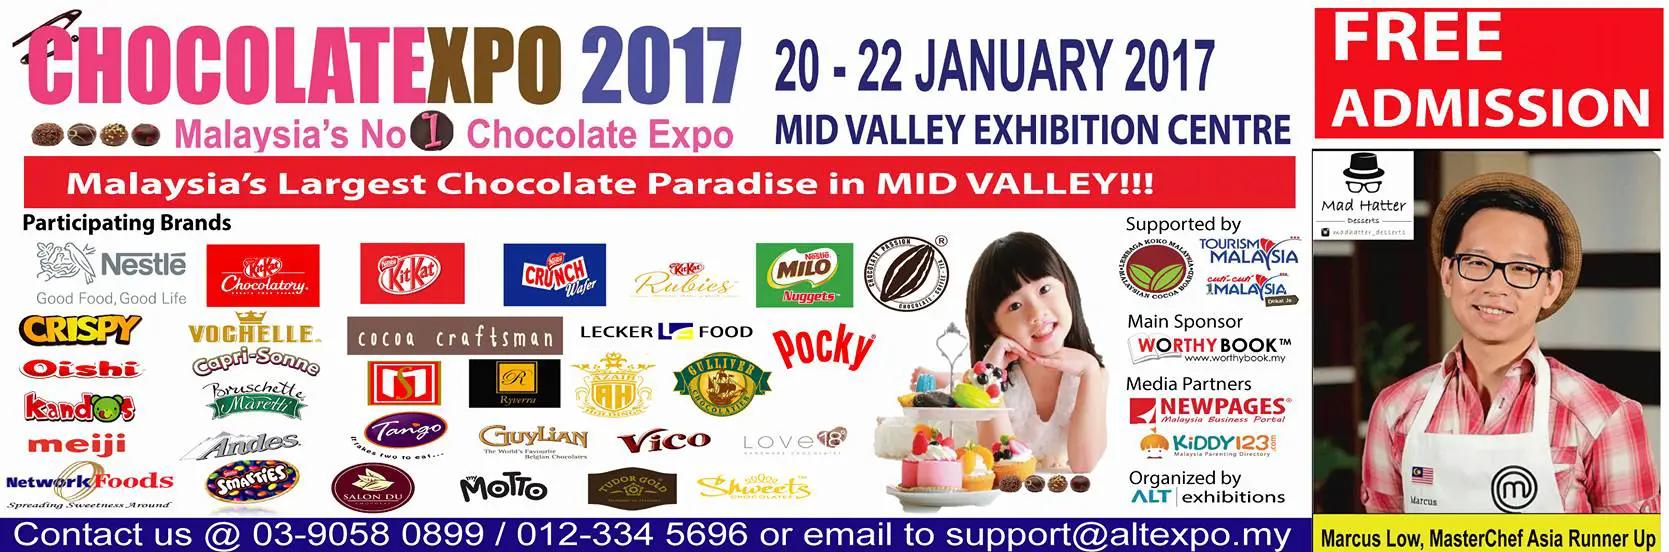 Image Credit: The 1st Malaysia Chocolate Expo 2017 Facebook